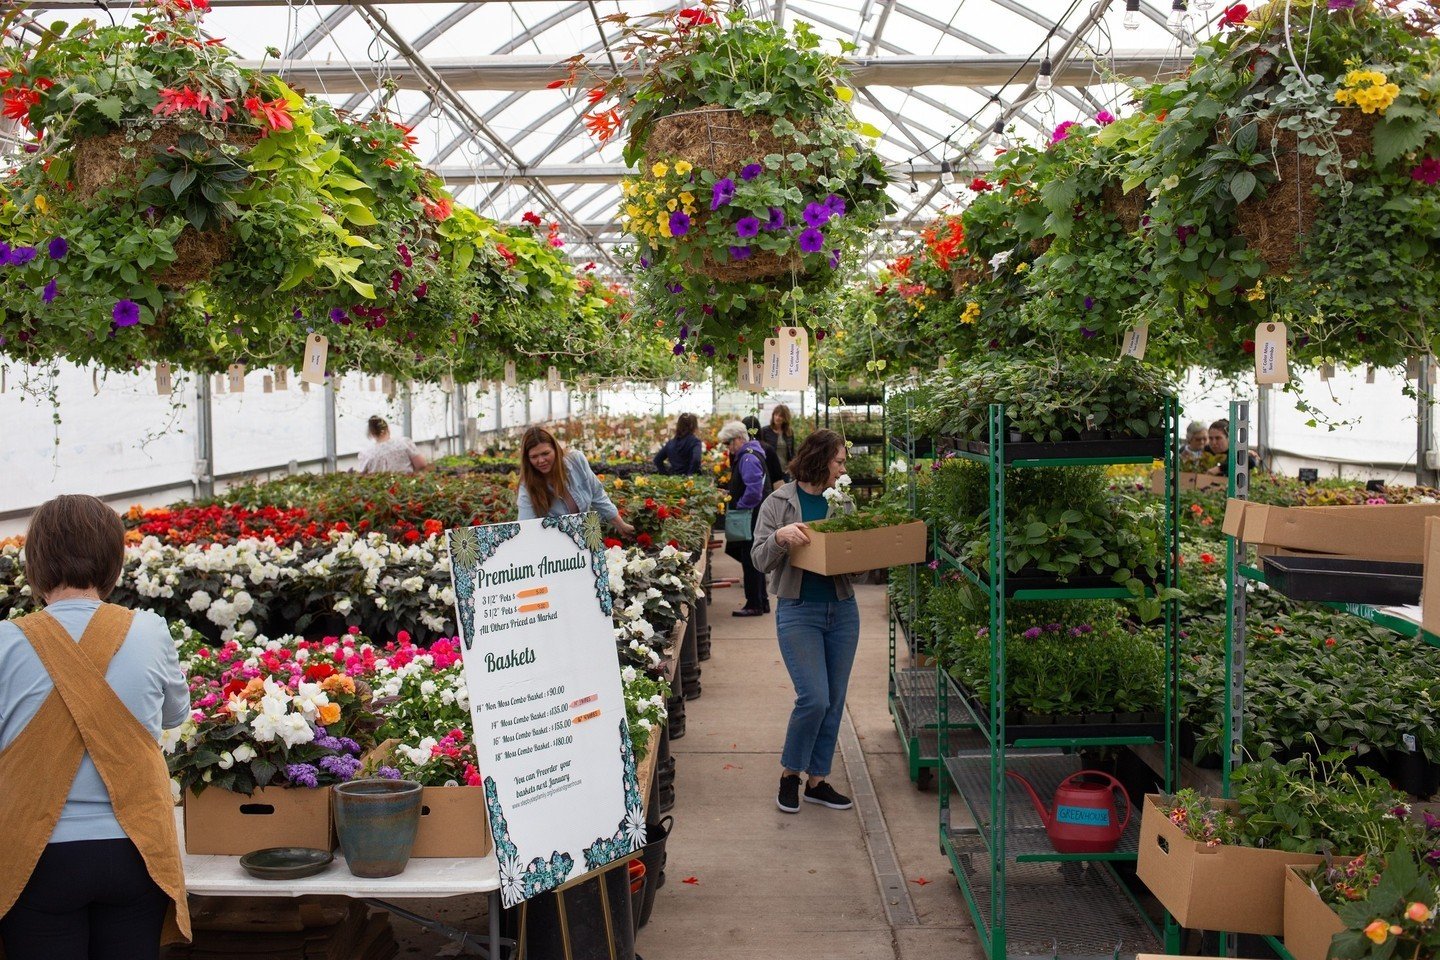 Our Loveland Greenhouse opening date is next Friday, April 26th! For those who pre-ordered hanging baskets, they'll be ready for pick-up. For those who missed pre-ordering, we'll have a limited number available on a first-come, first-served basis, as